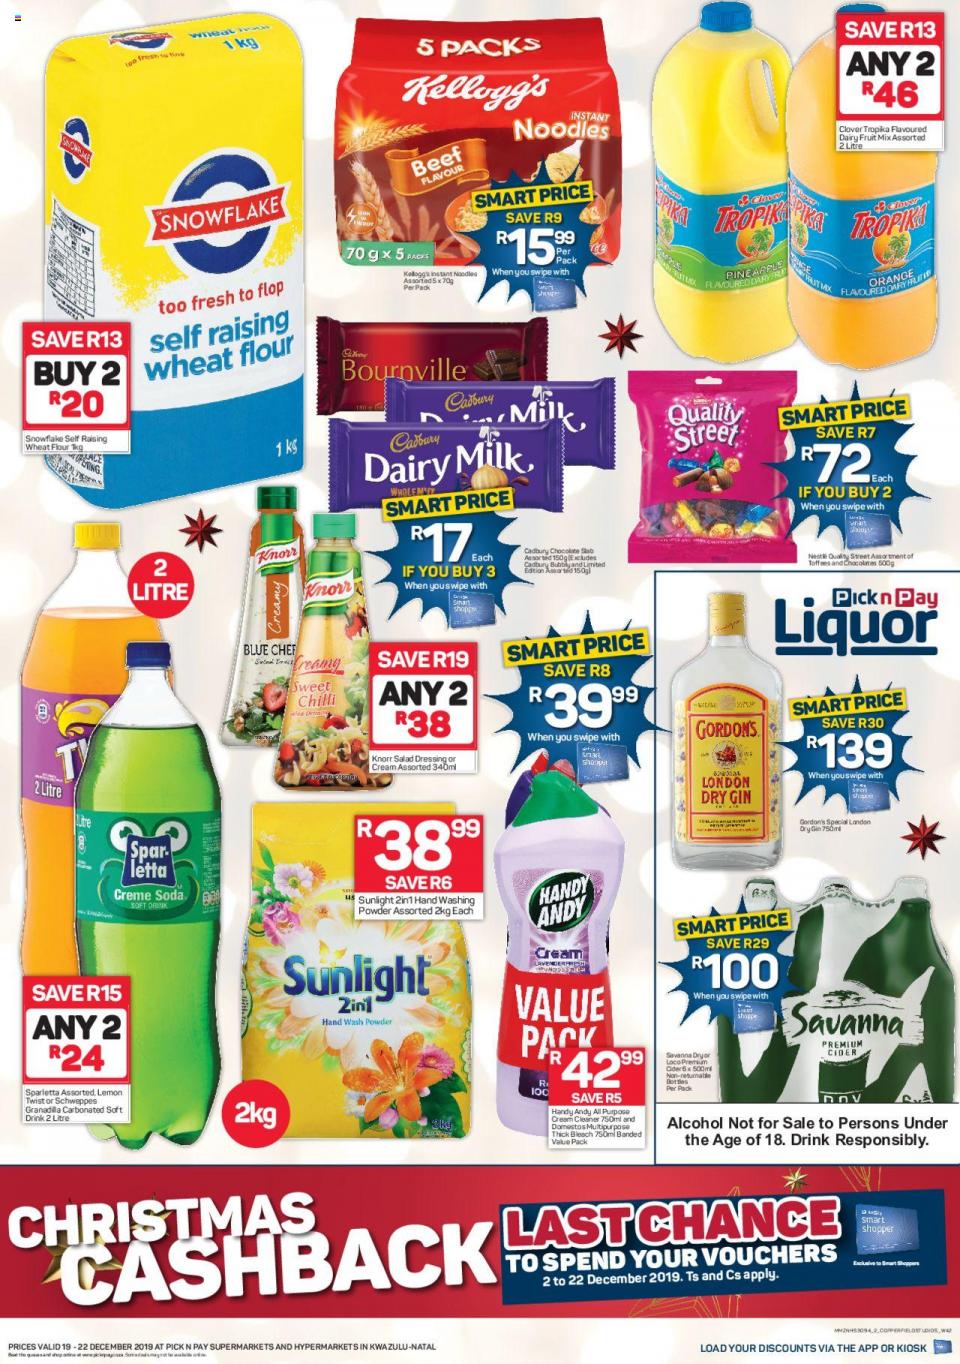 Pick n Pay Western Cape : Specials (05 October - 08 October 2023